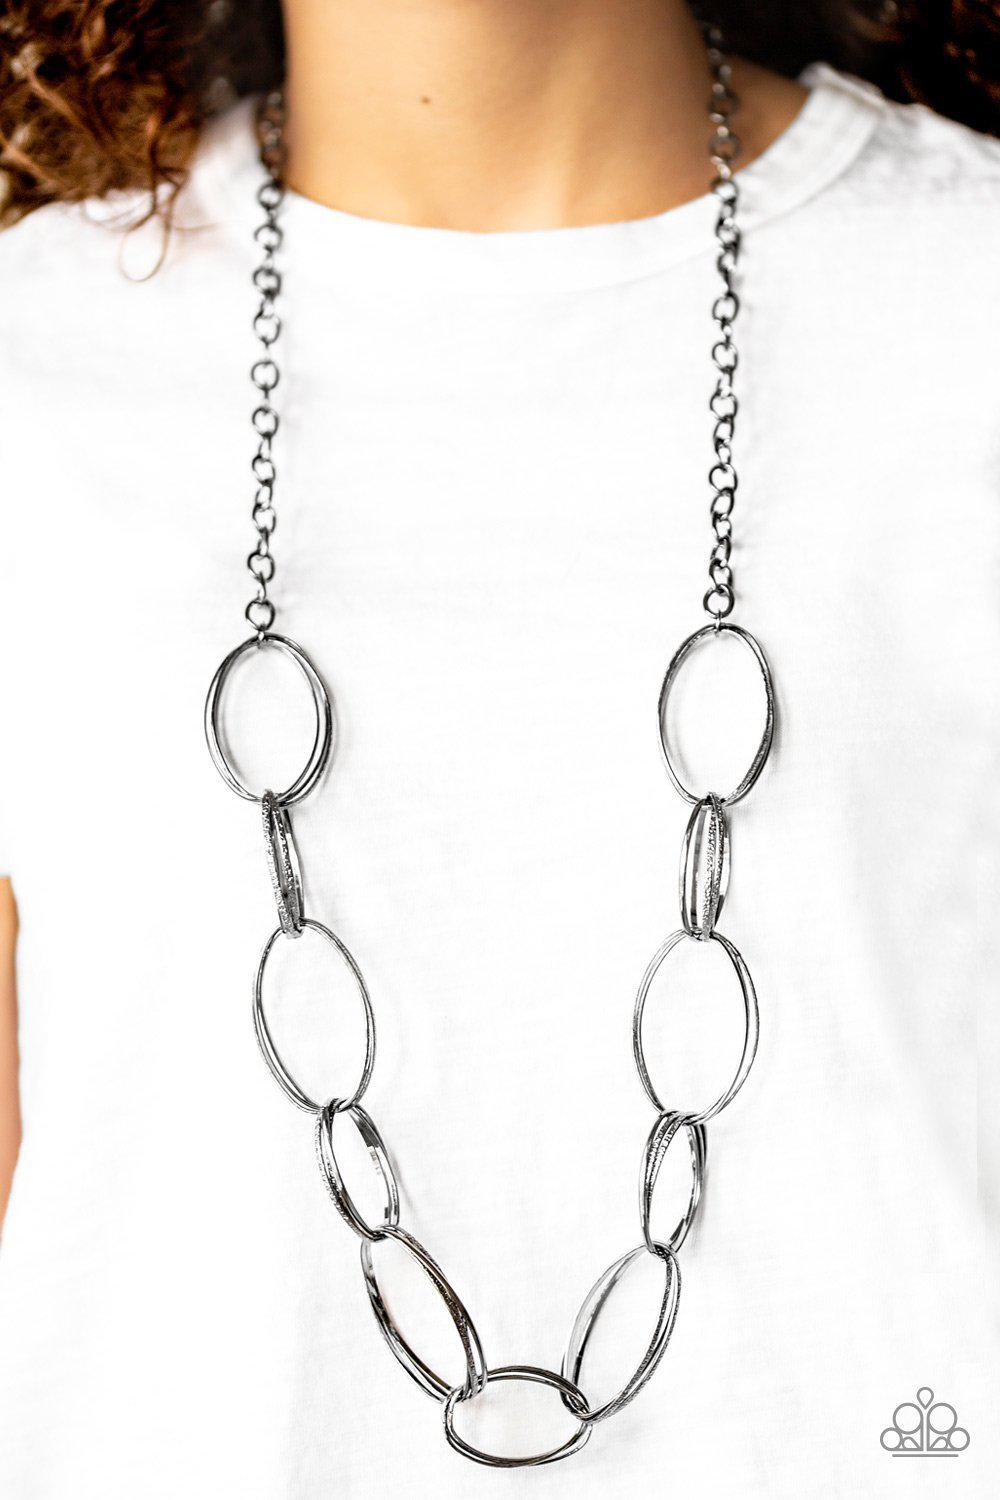 Ring Bling Black Gunmetal Necklace - Paparazzi Accessories-CarasShop.com - $5 Jewelry by Cara Jewels